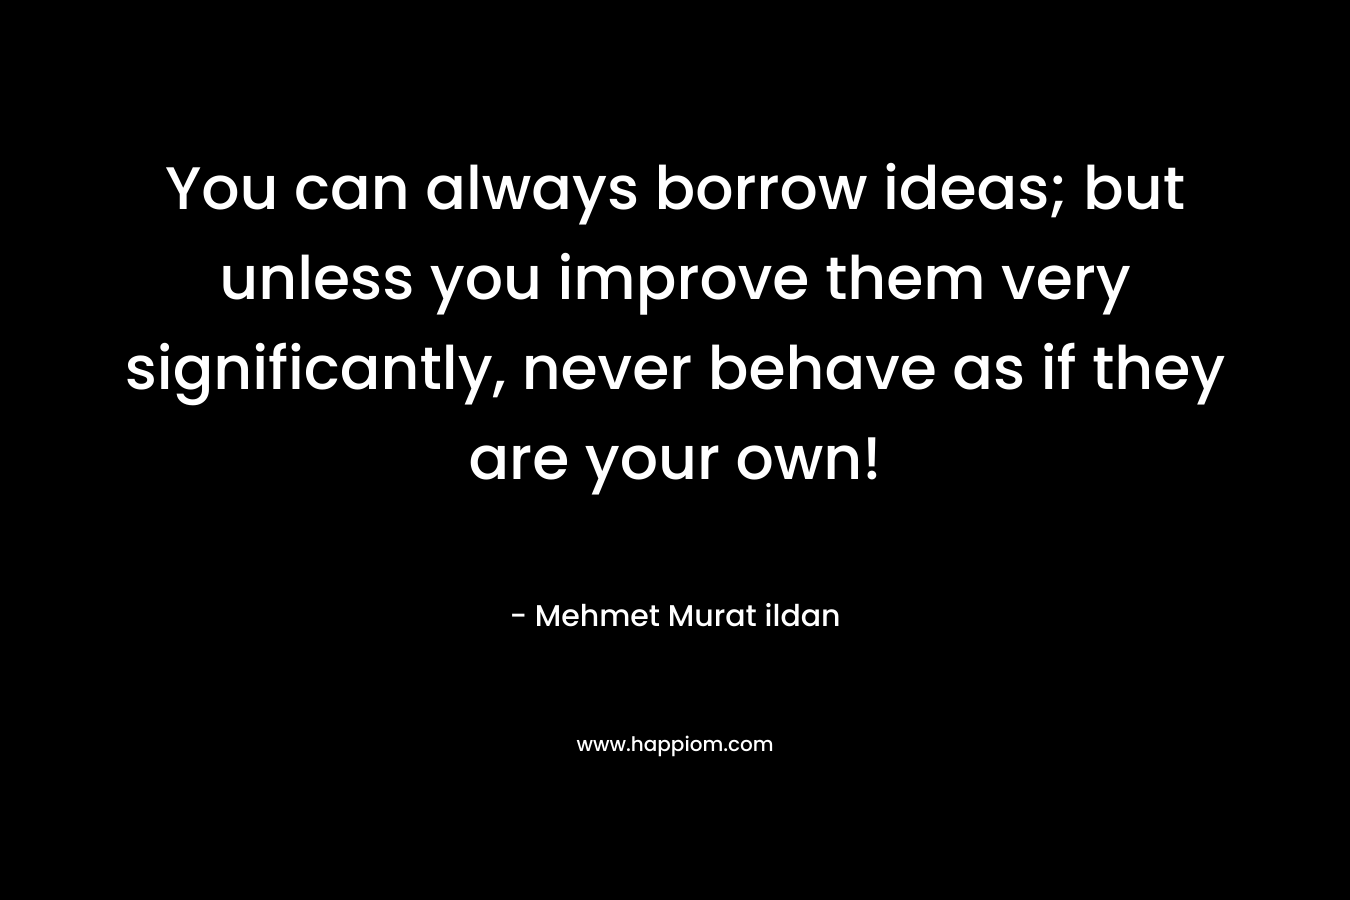 You can always borrow ideas; but unless you improve them very significantly, never behave as if they are your own!